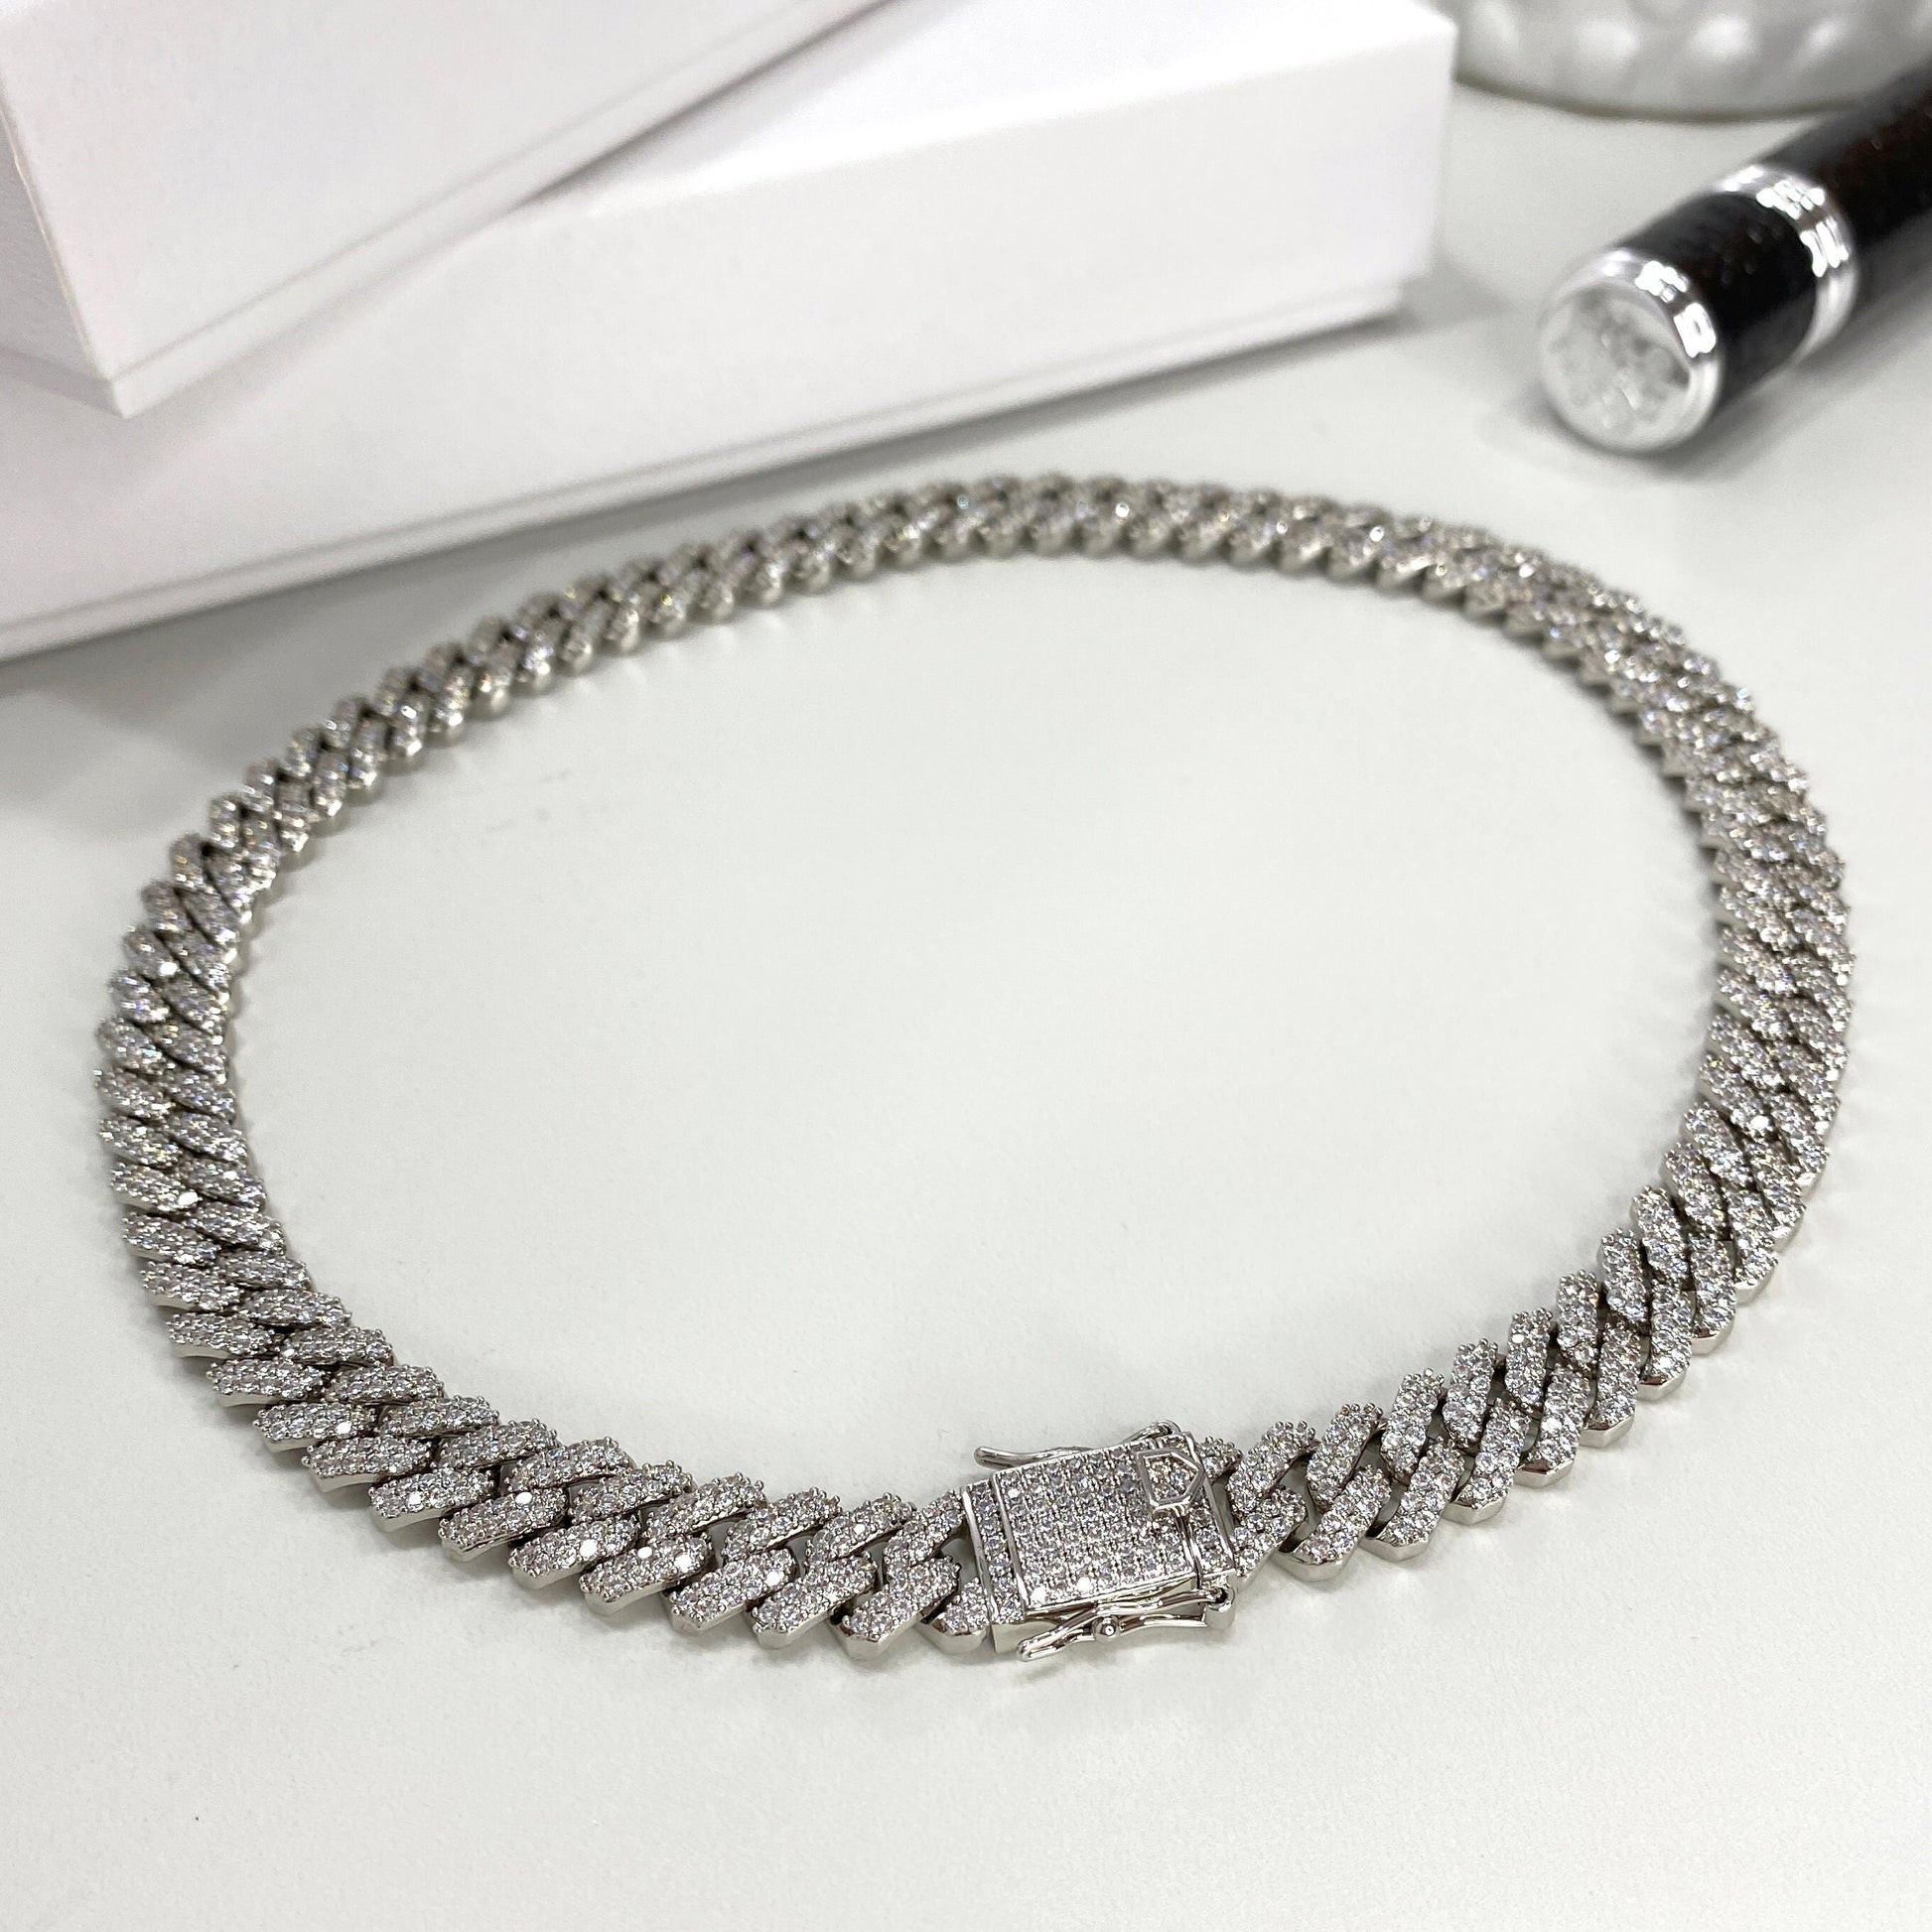 Silver Filled Iced Miami Cuban Chain Featuring Double Safety Lock Box Cubic Zirconia, Unisex Chain or Bracelet, Wholesale Jewelry Supplies